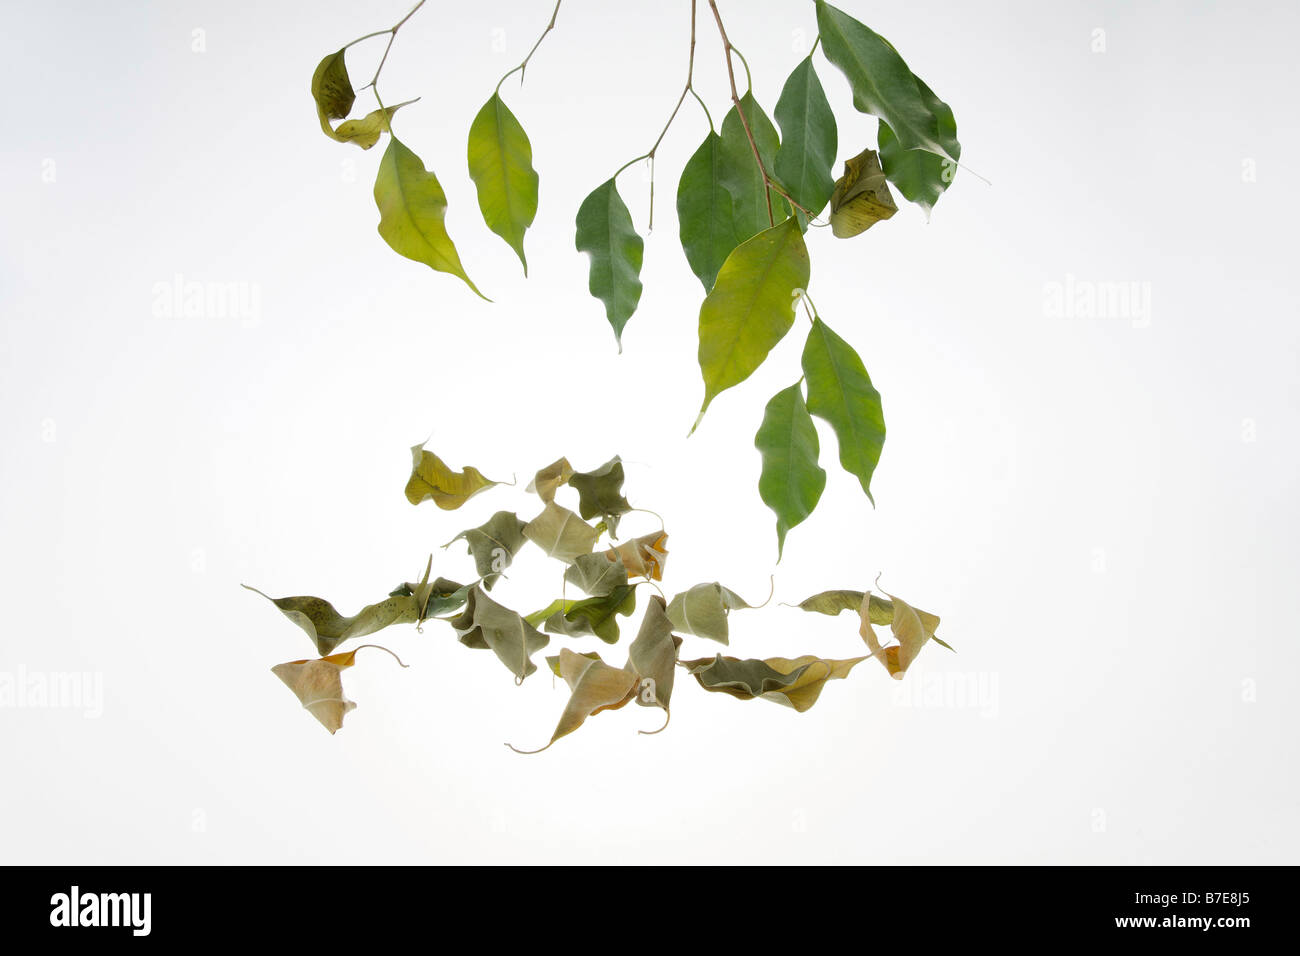 clip image drying leaves of potted fig tree Ficus benjaminii symbolism of green thumb or green fingers Stock Photo